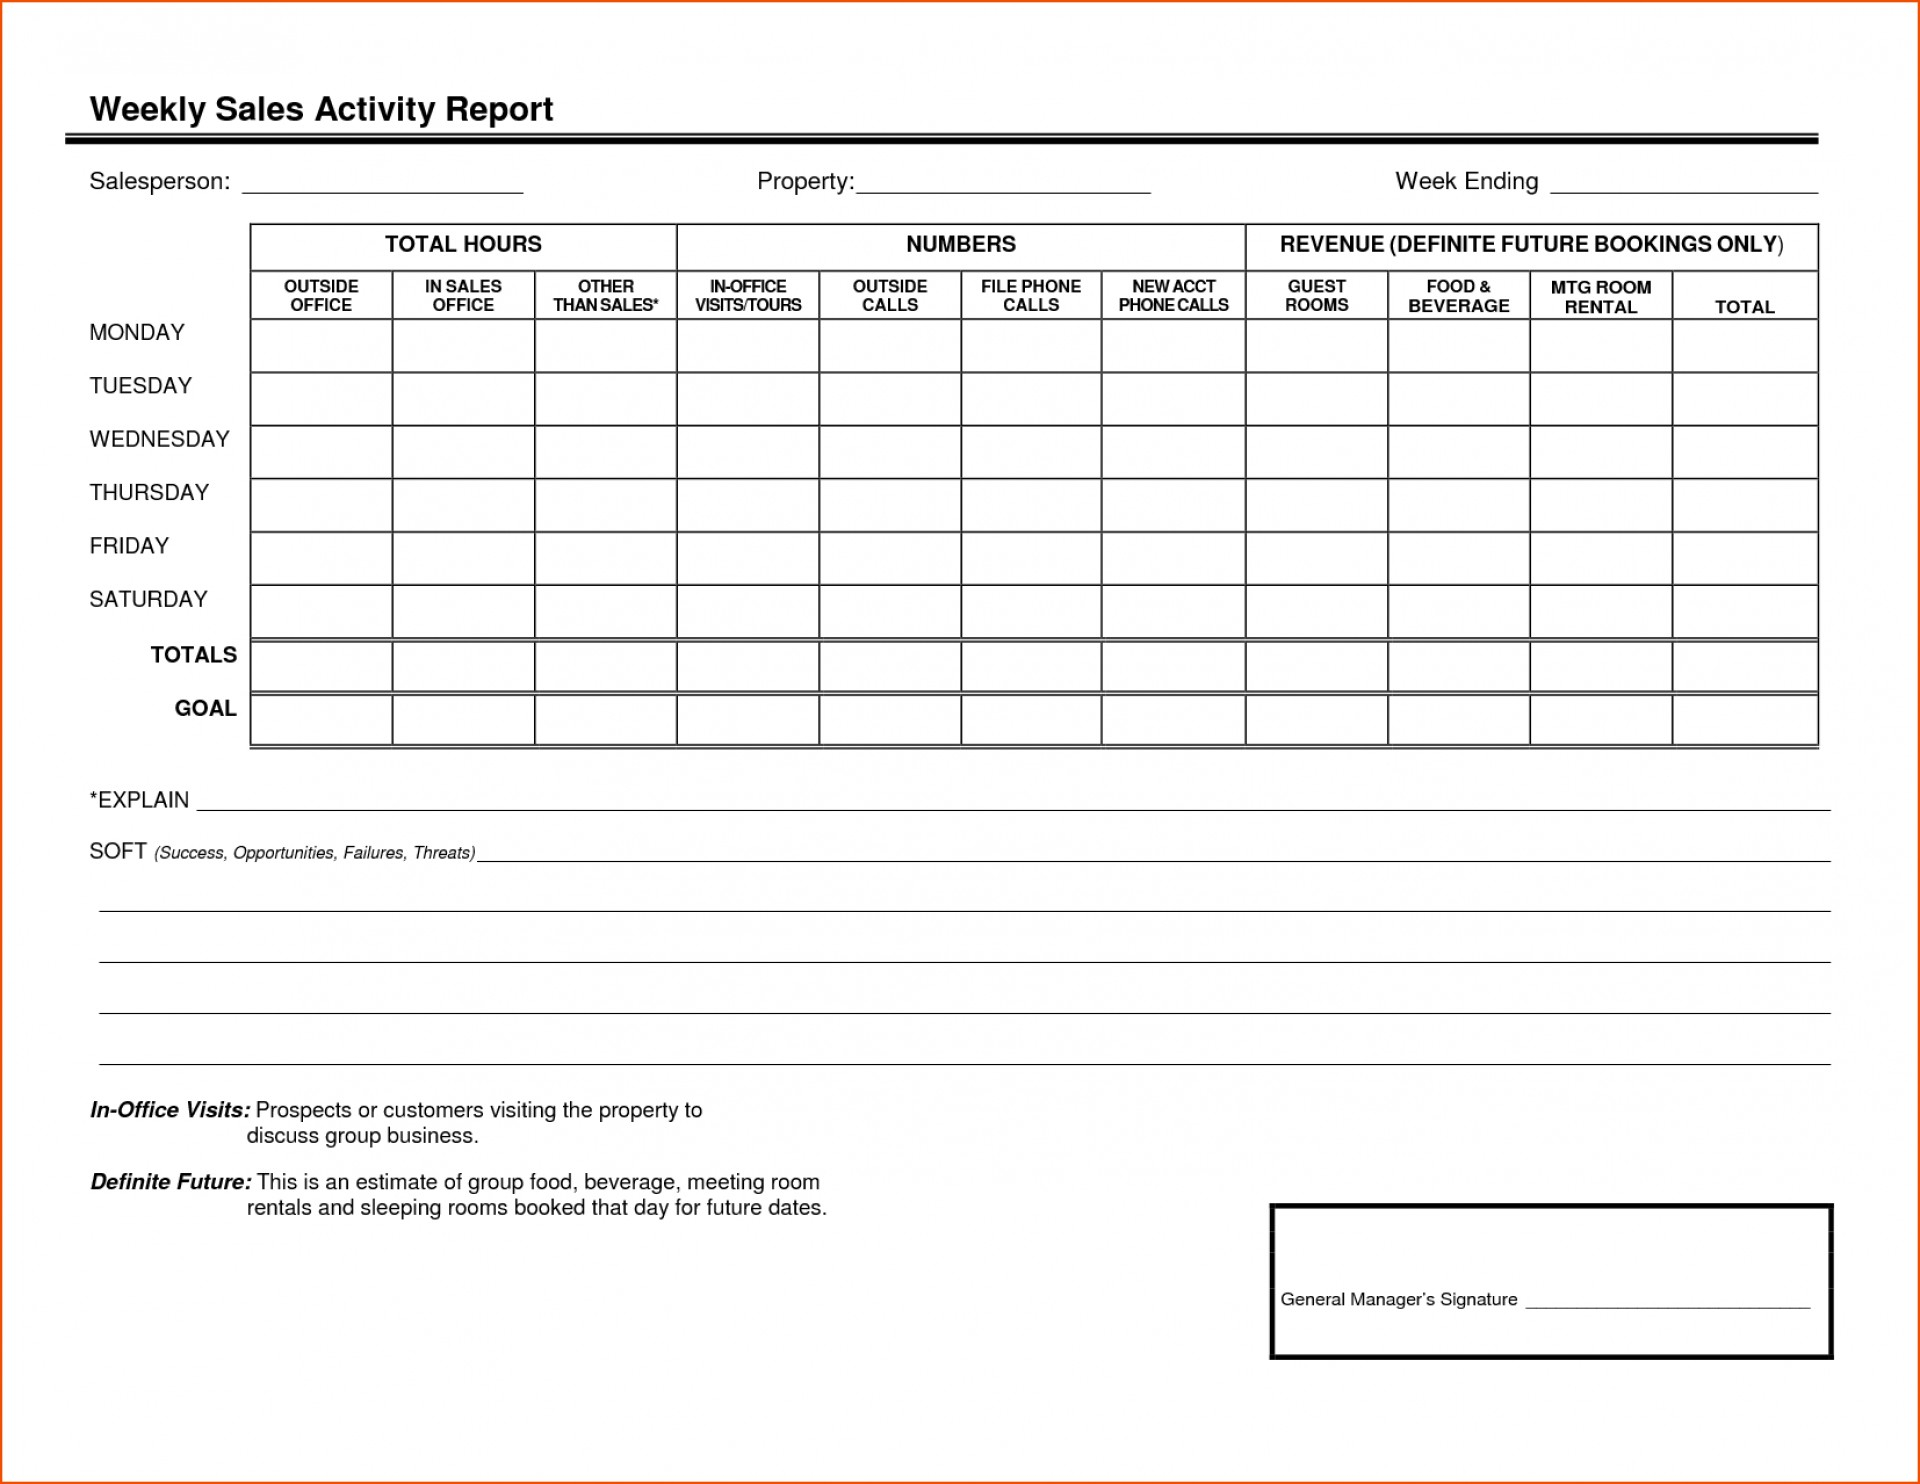 001 Sales Calls Report Template Call Awesome Ideas Daily In Regarding Sales Rep Visit Report Template